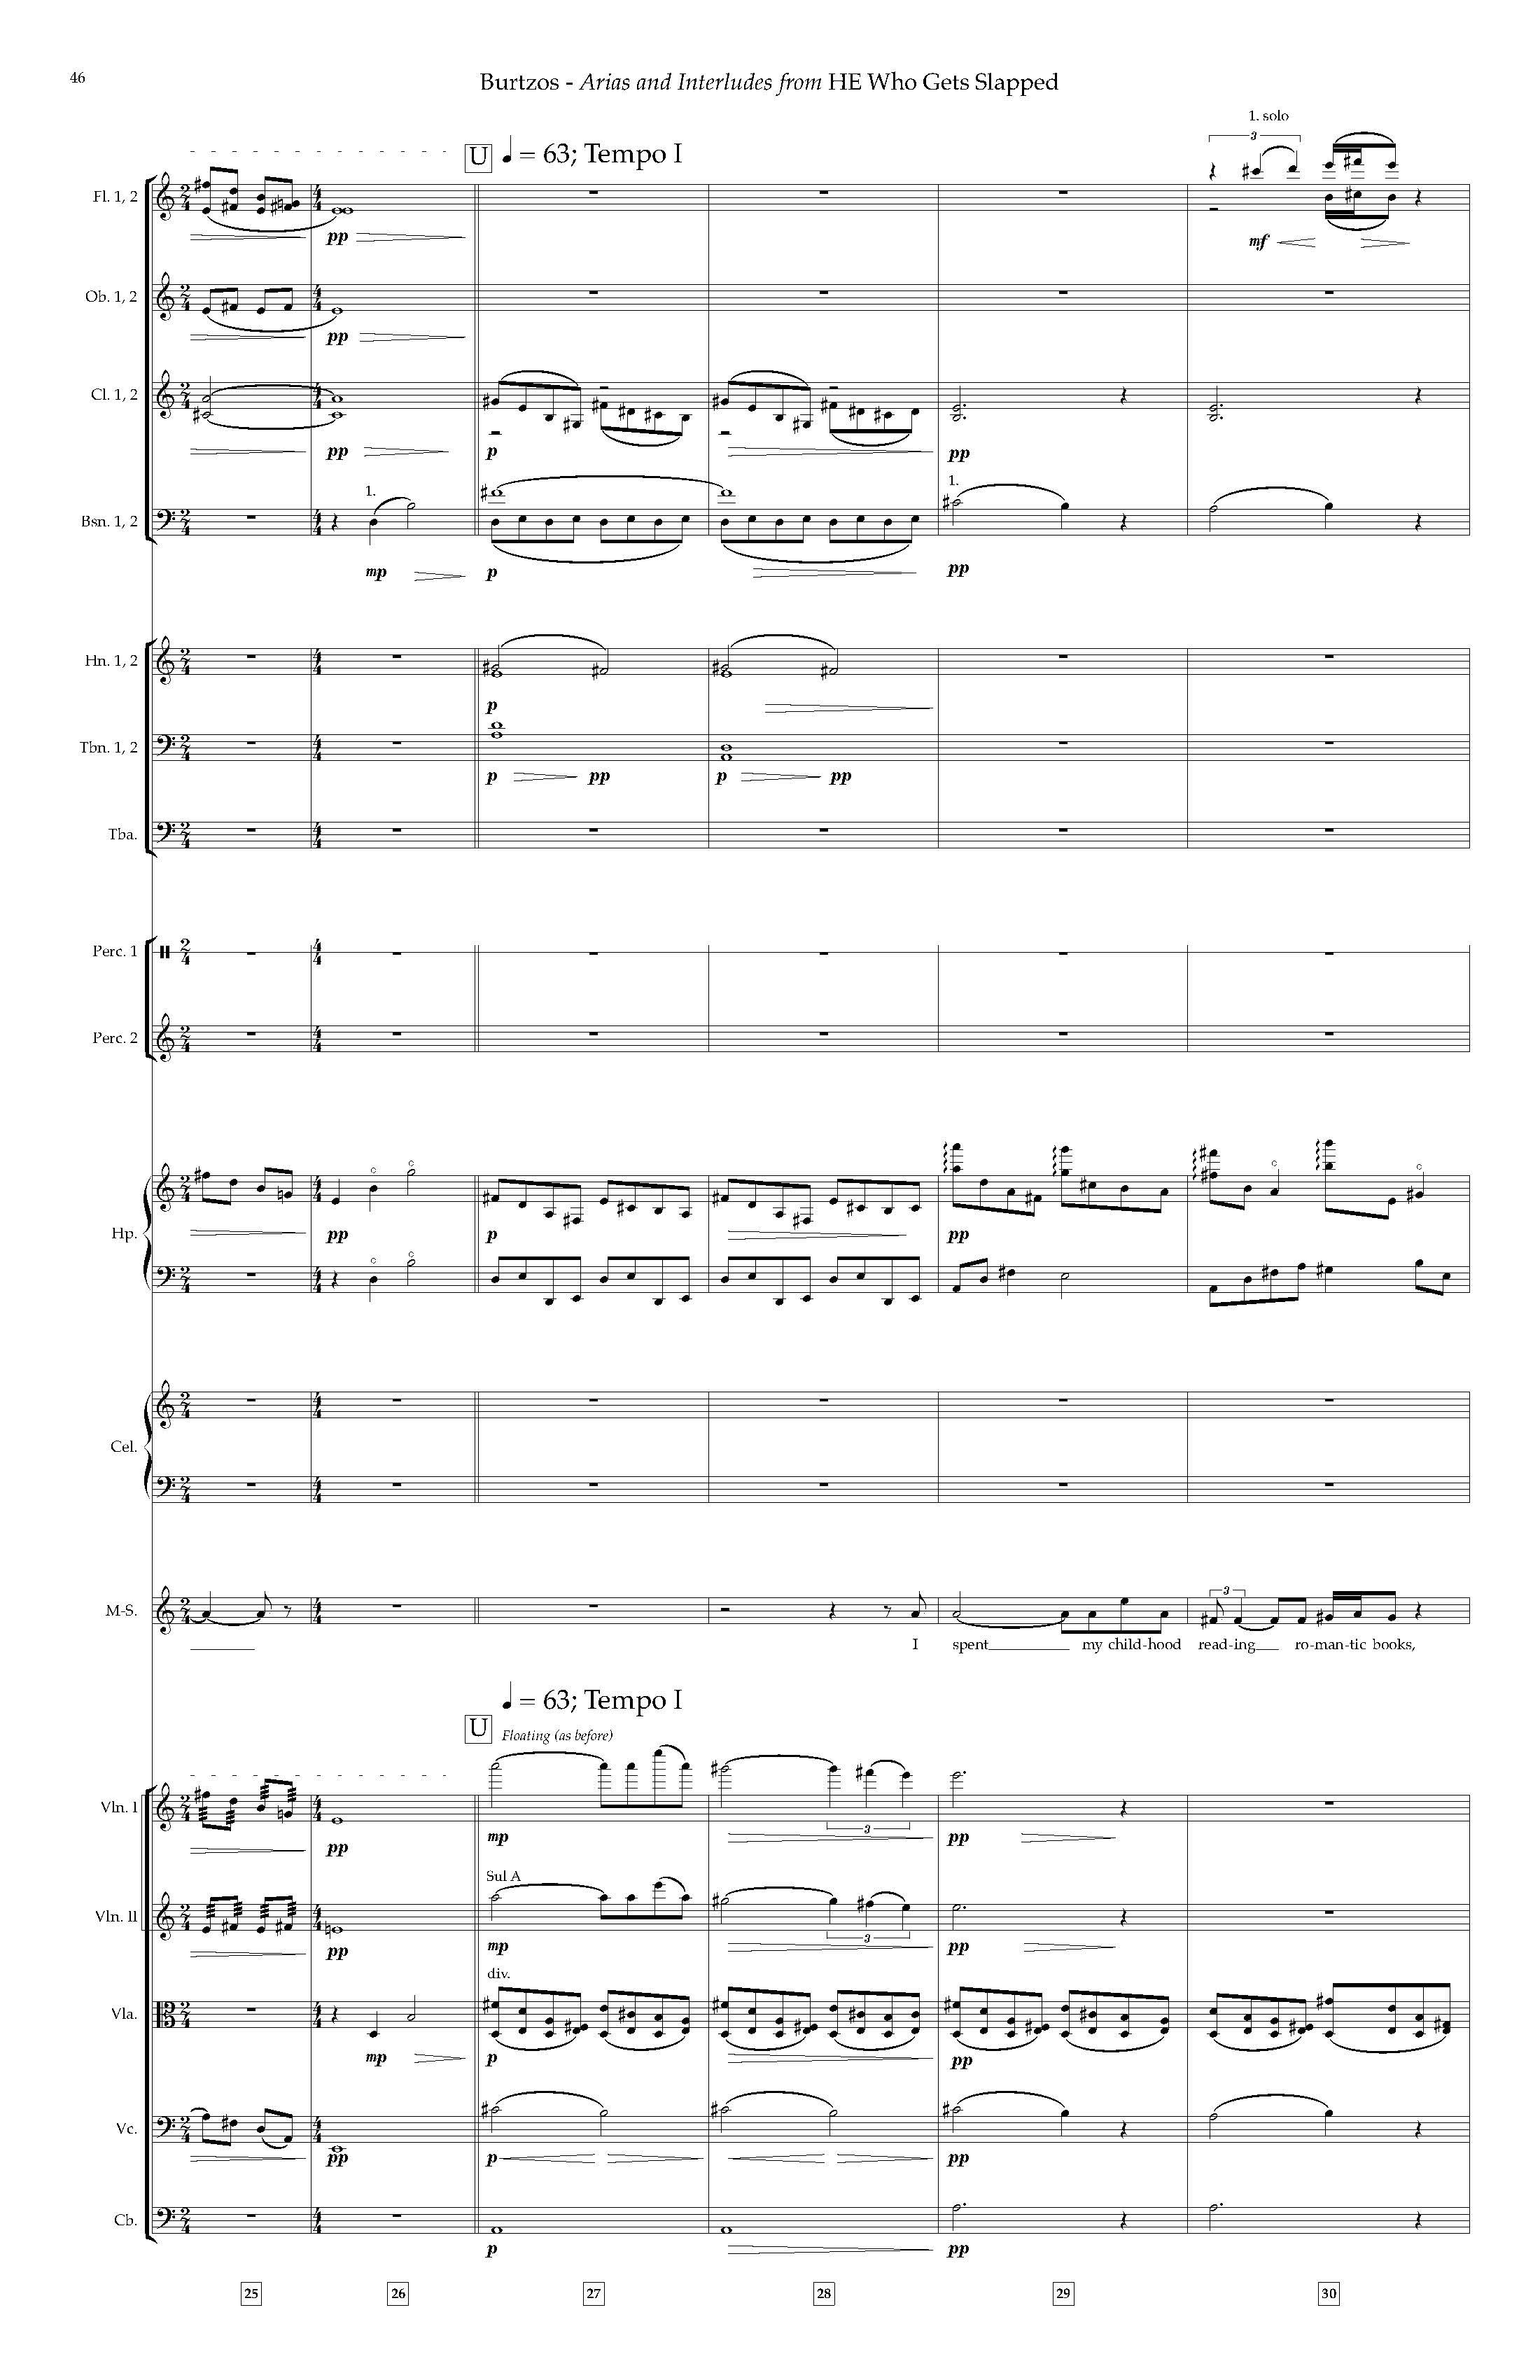 Arias and Interludes from HWGS - Complete Score_Page_52.jpg